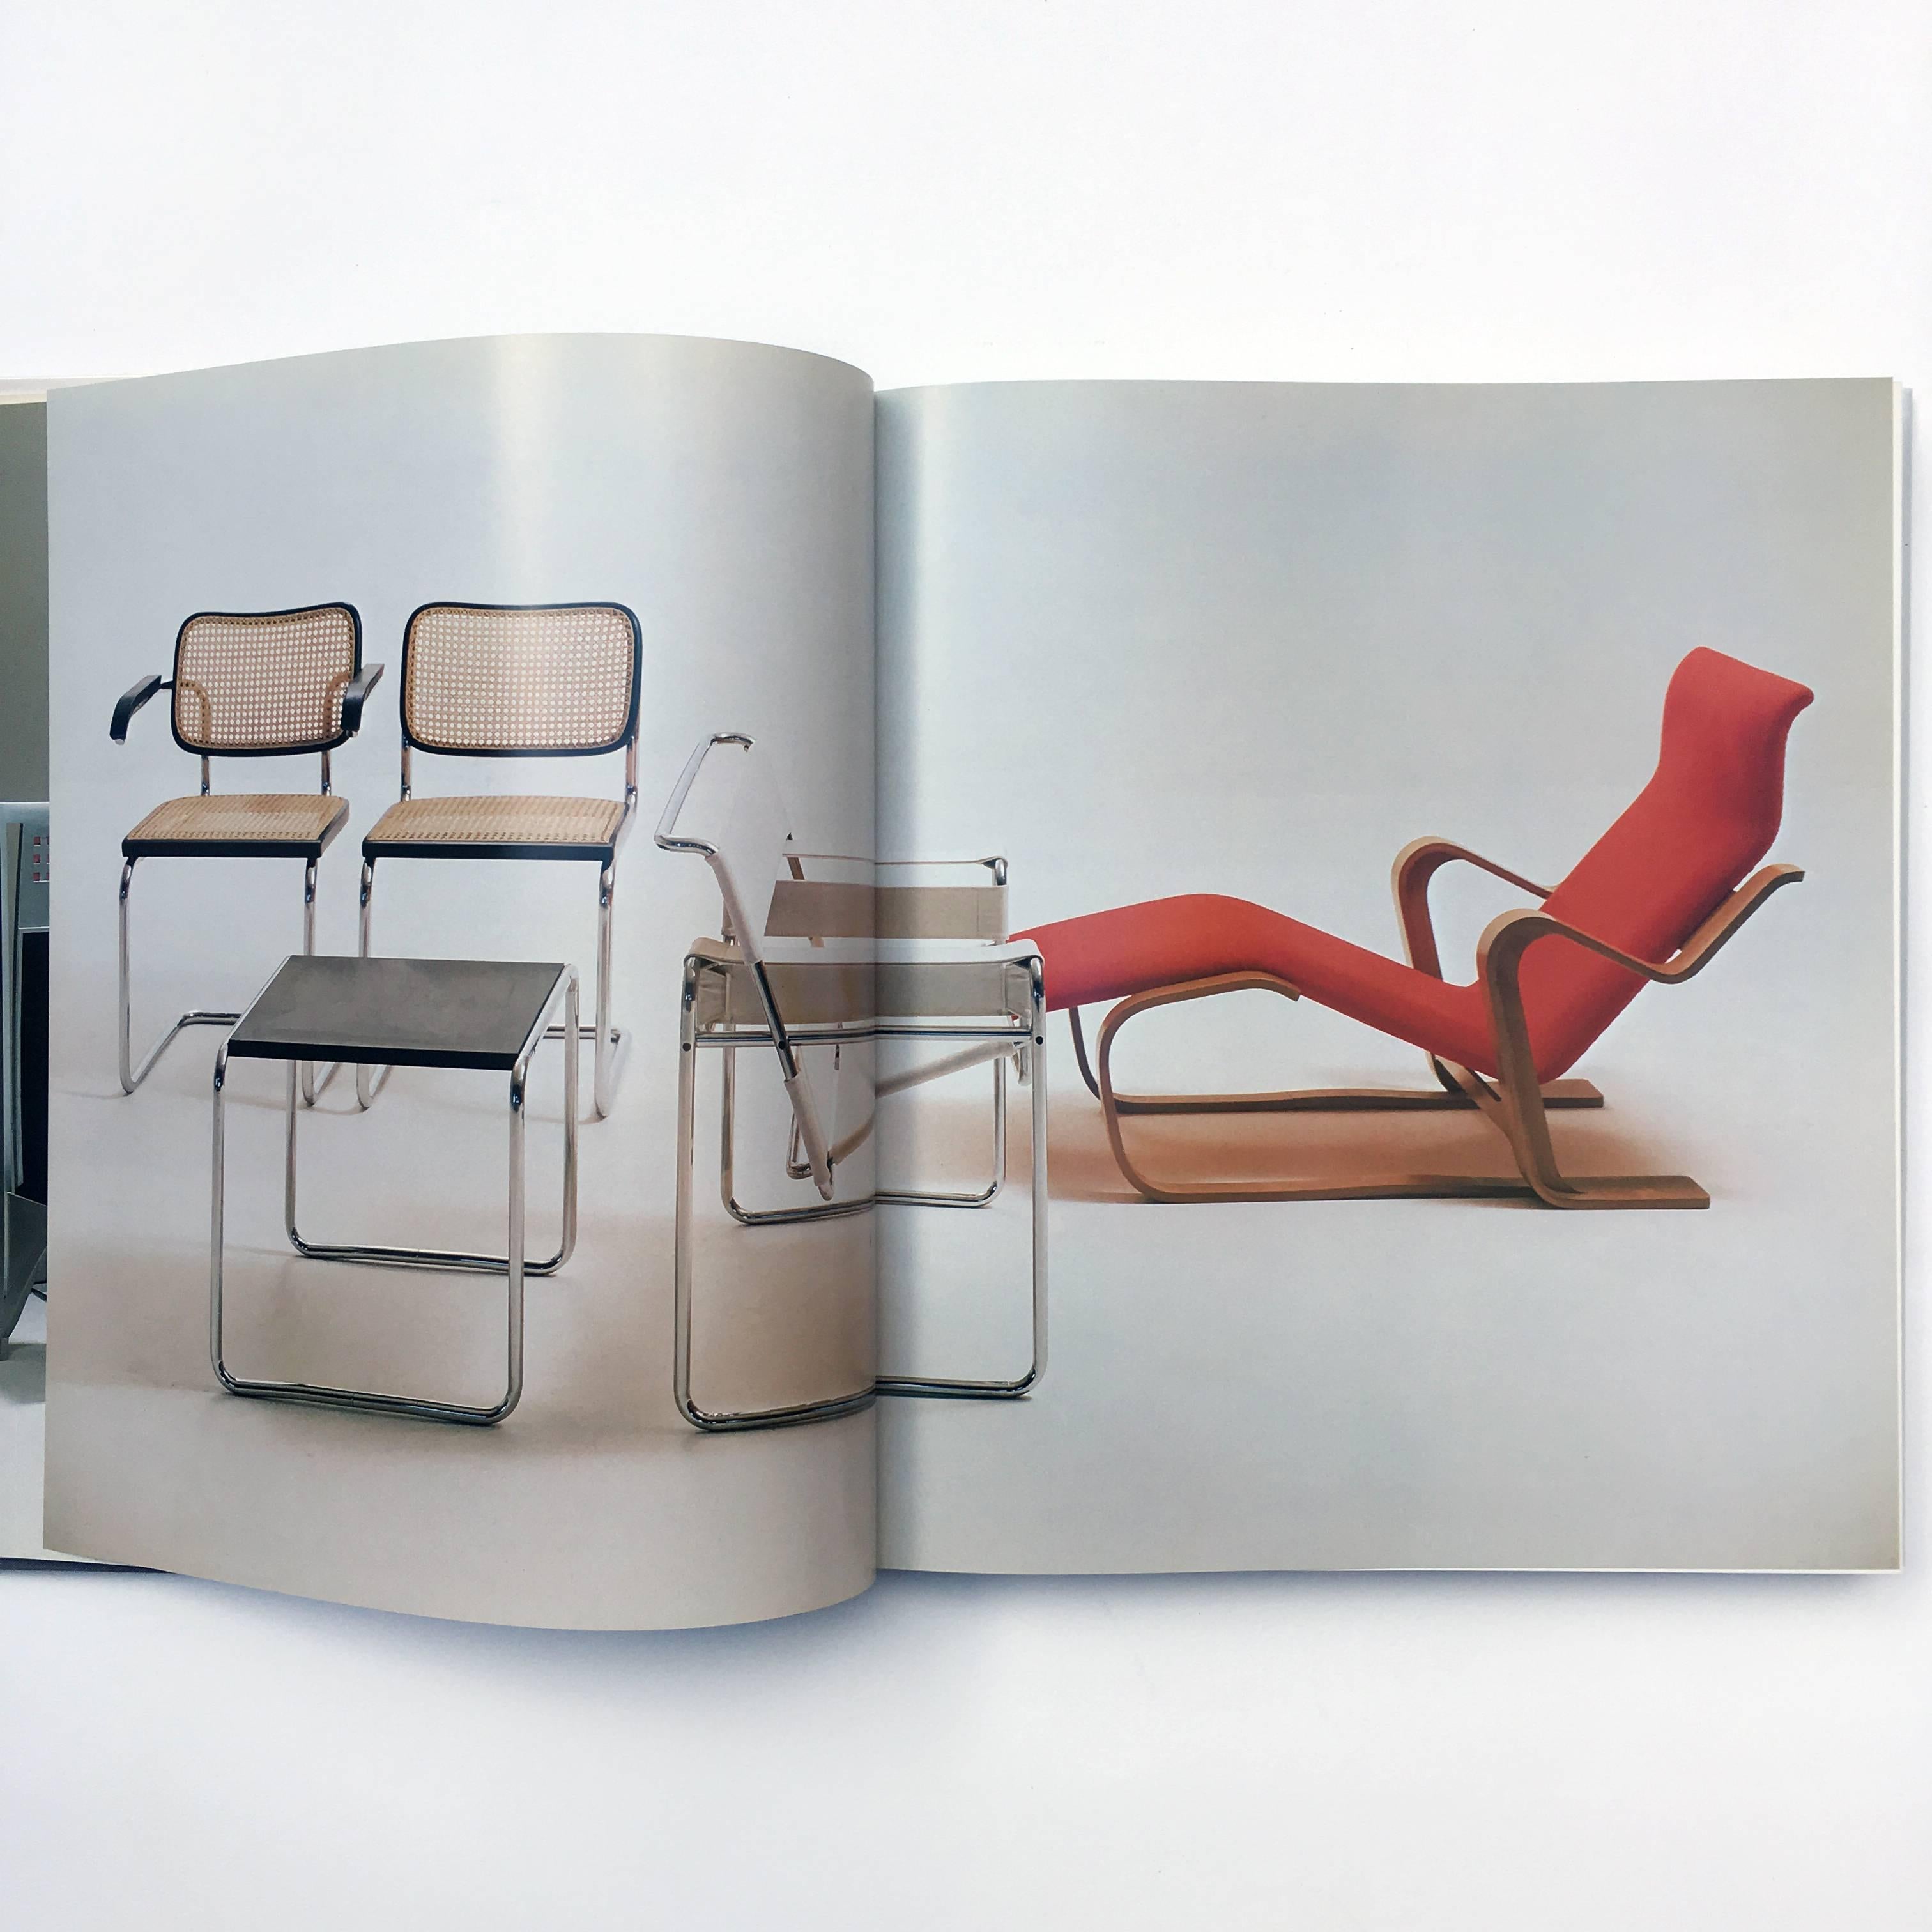 Late 20th Century Furniture by Architects,  Marc Emery, 1988